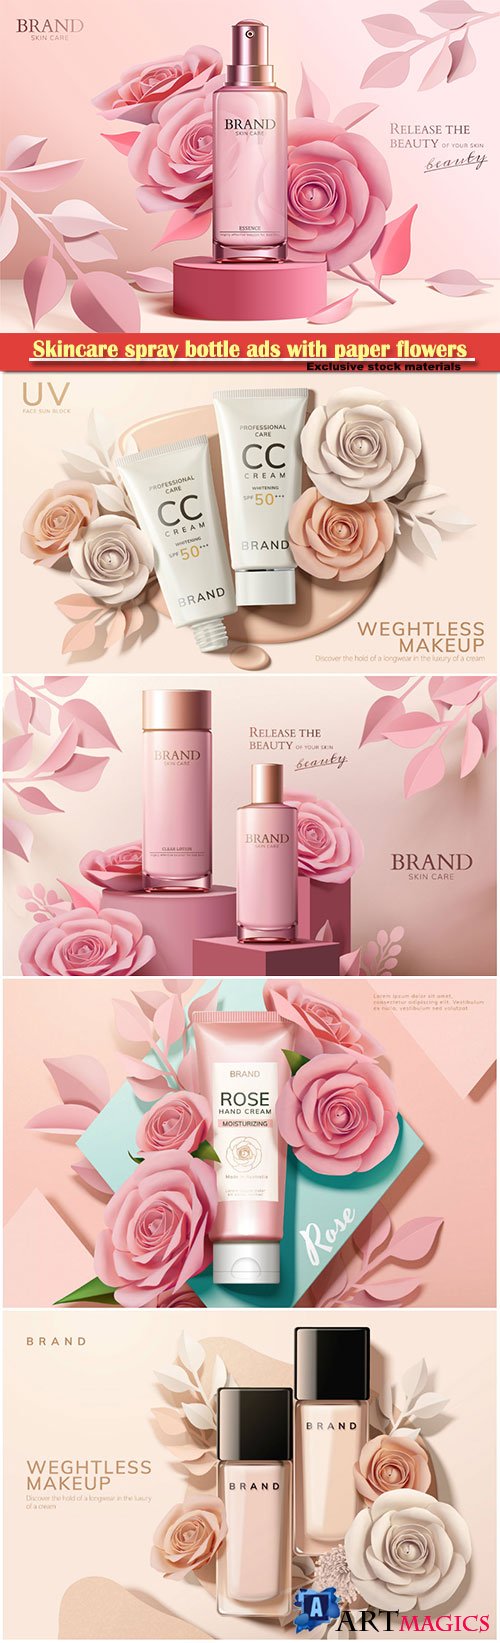 Skincare spray bottle ads with paper flowers, 3d illustration